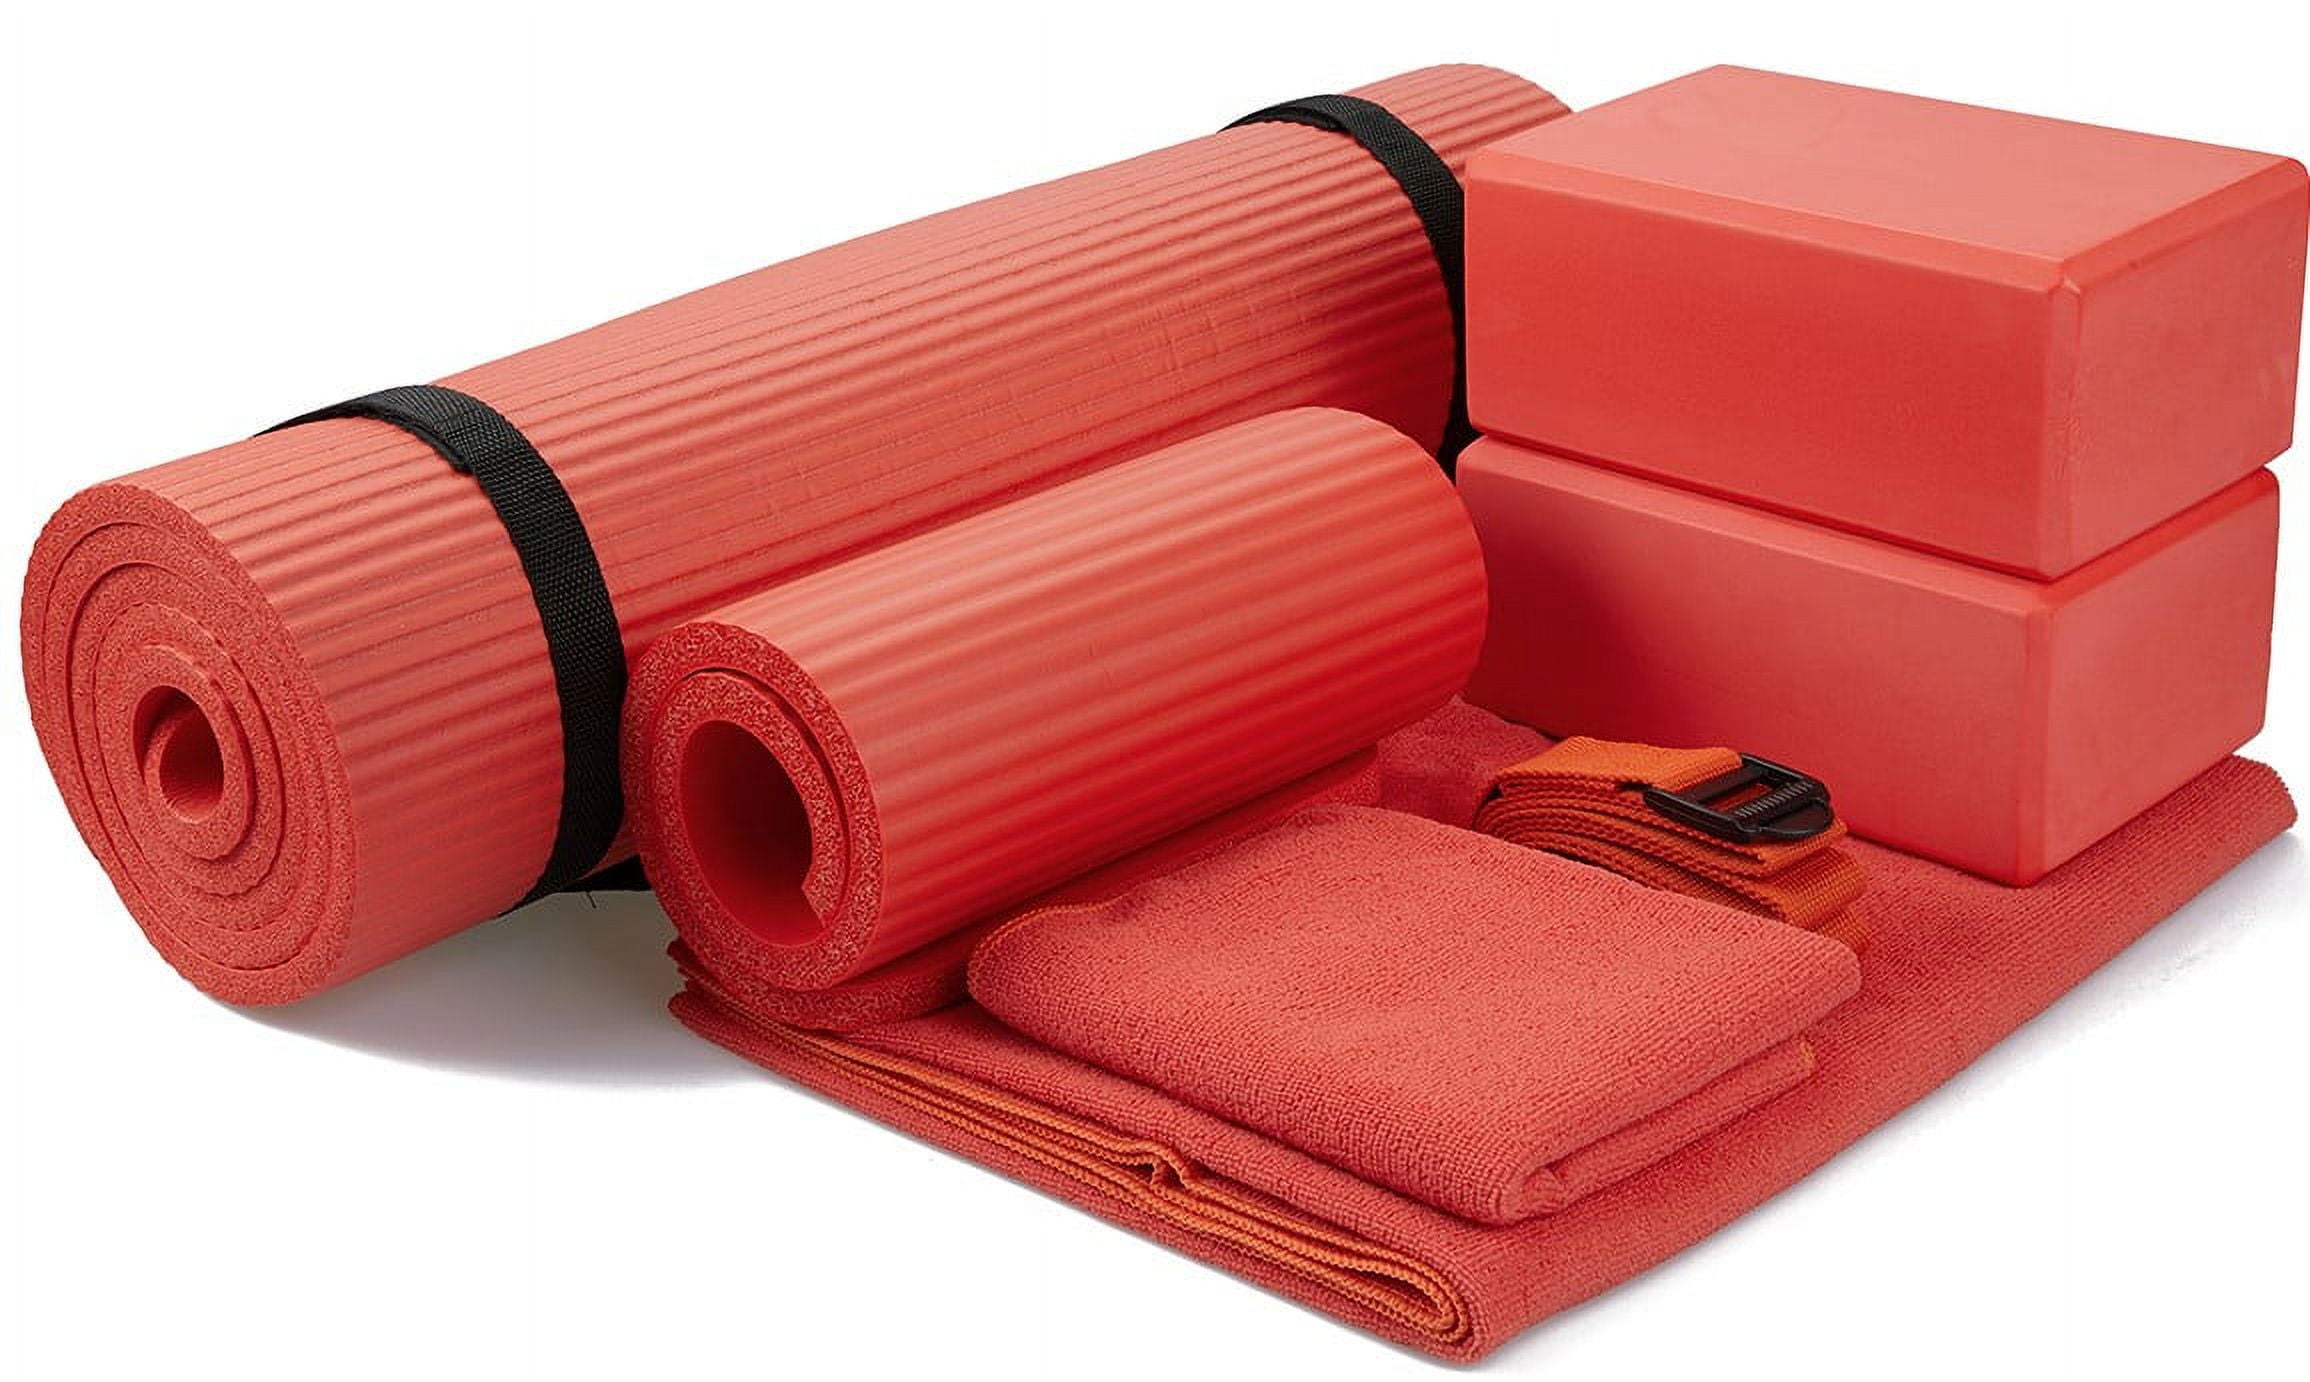 BalanceFrom 7-Piece Set - Include Yoga Mat with Carrying Strap, 2